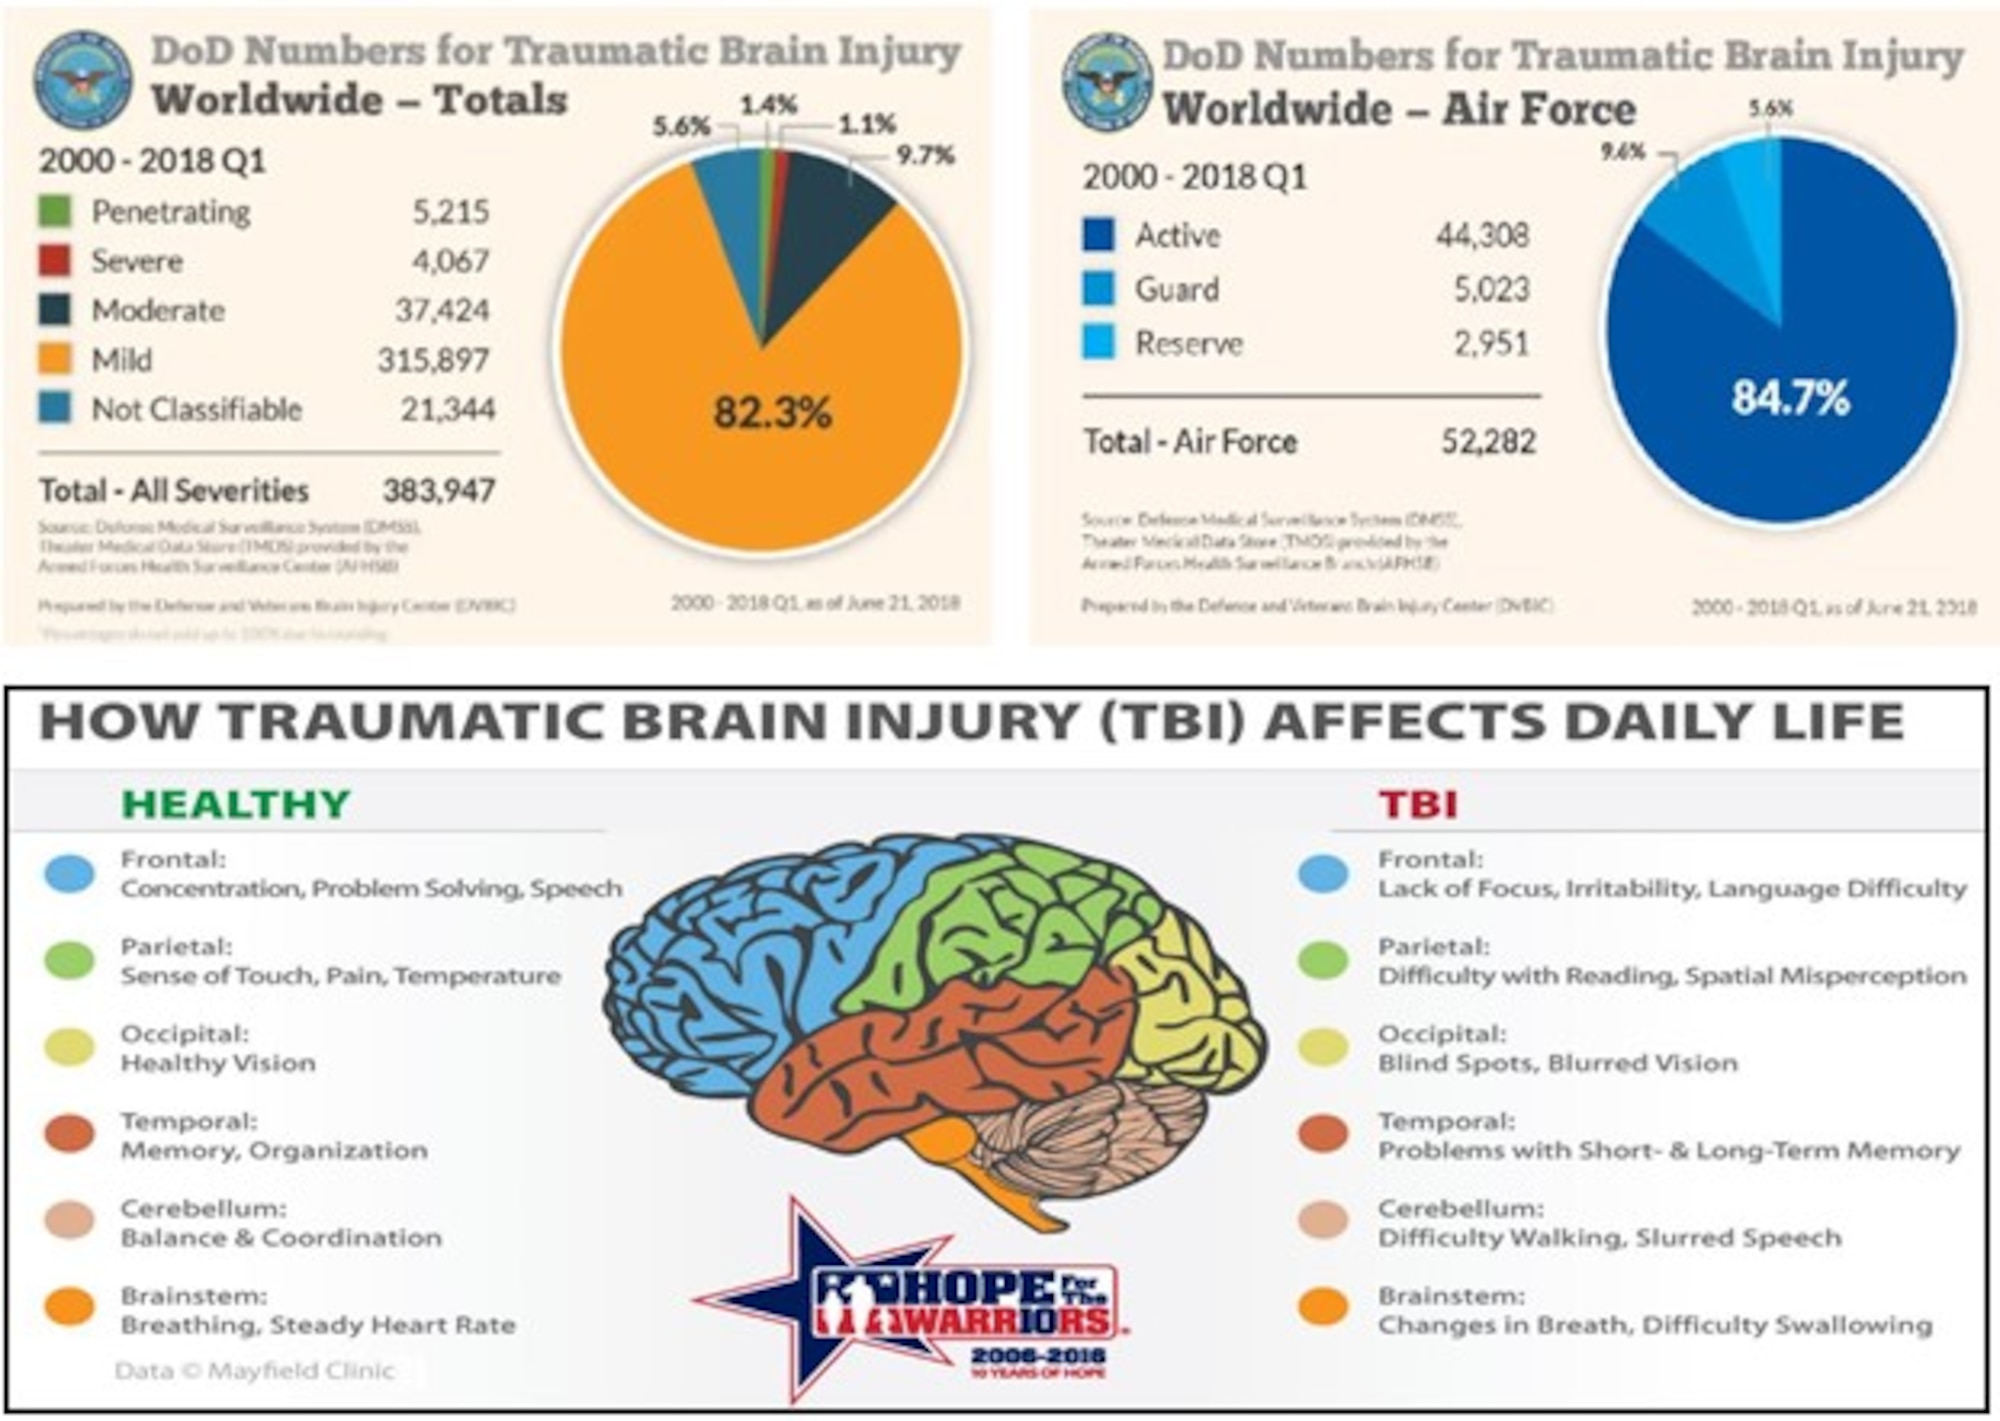 More Than a Mere Month: Traumatic Brain Injury Awareness